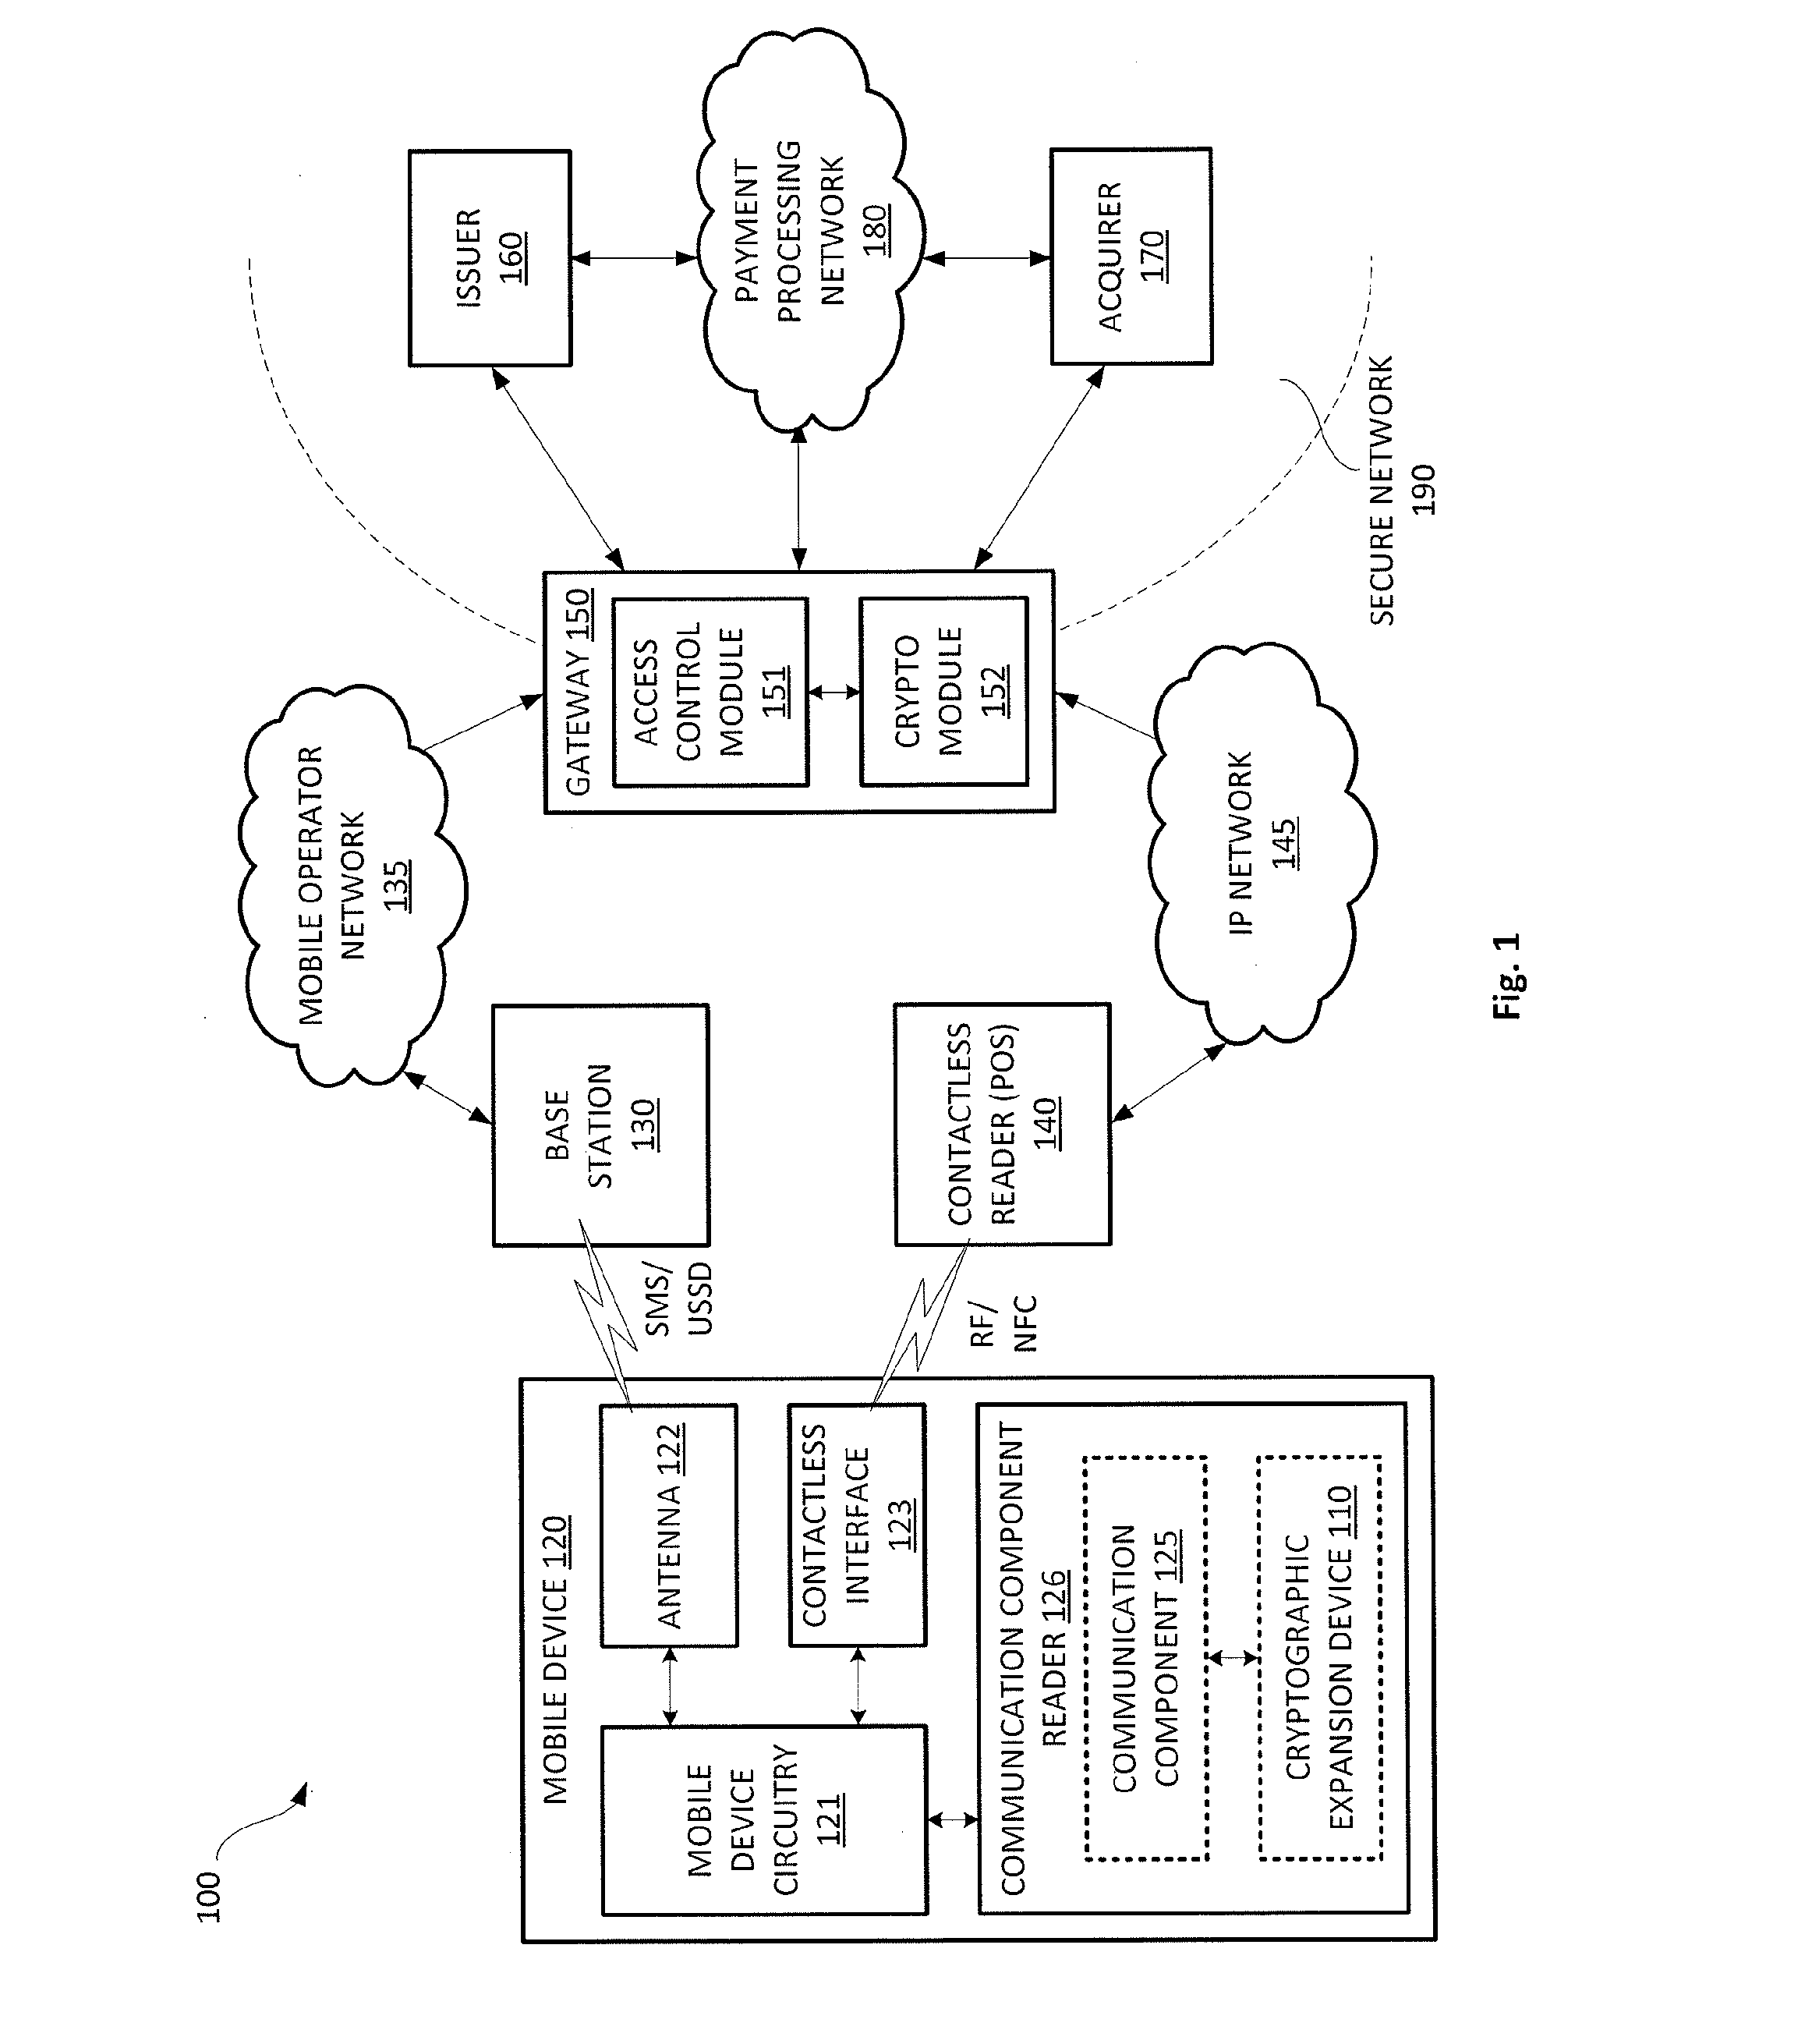 Mobile banking system with cryptographic expansion device